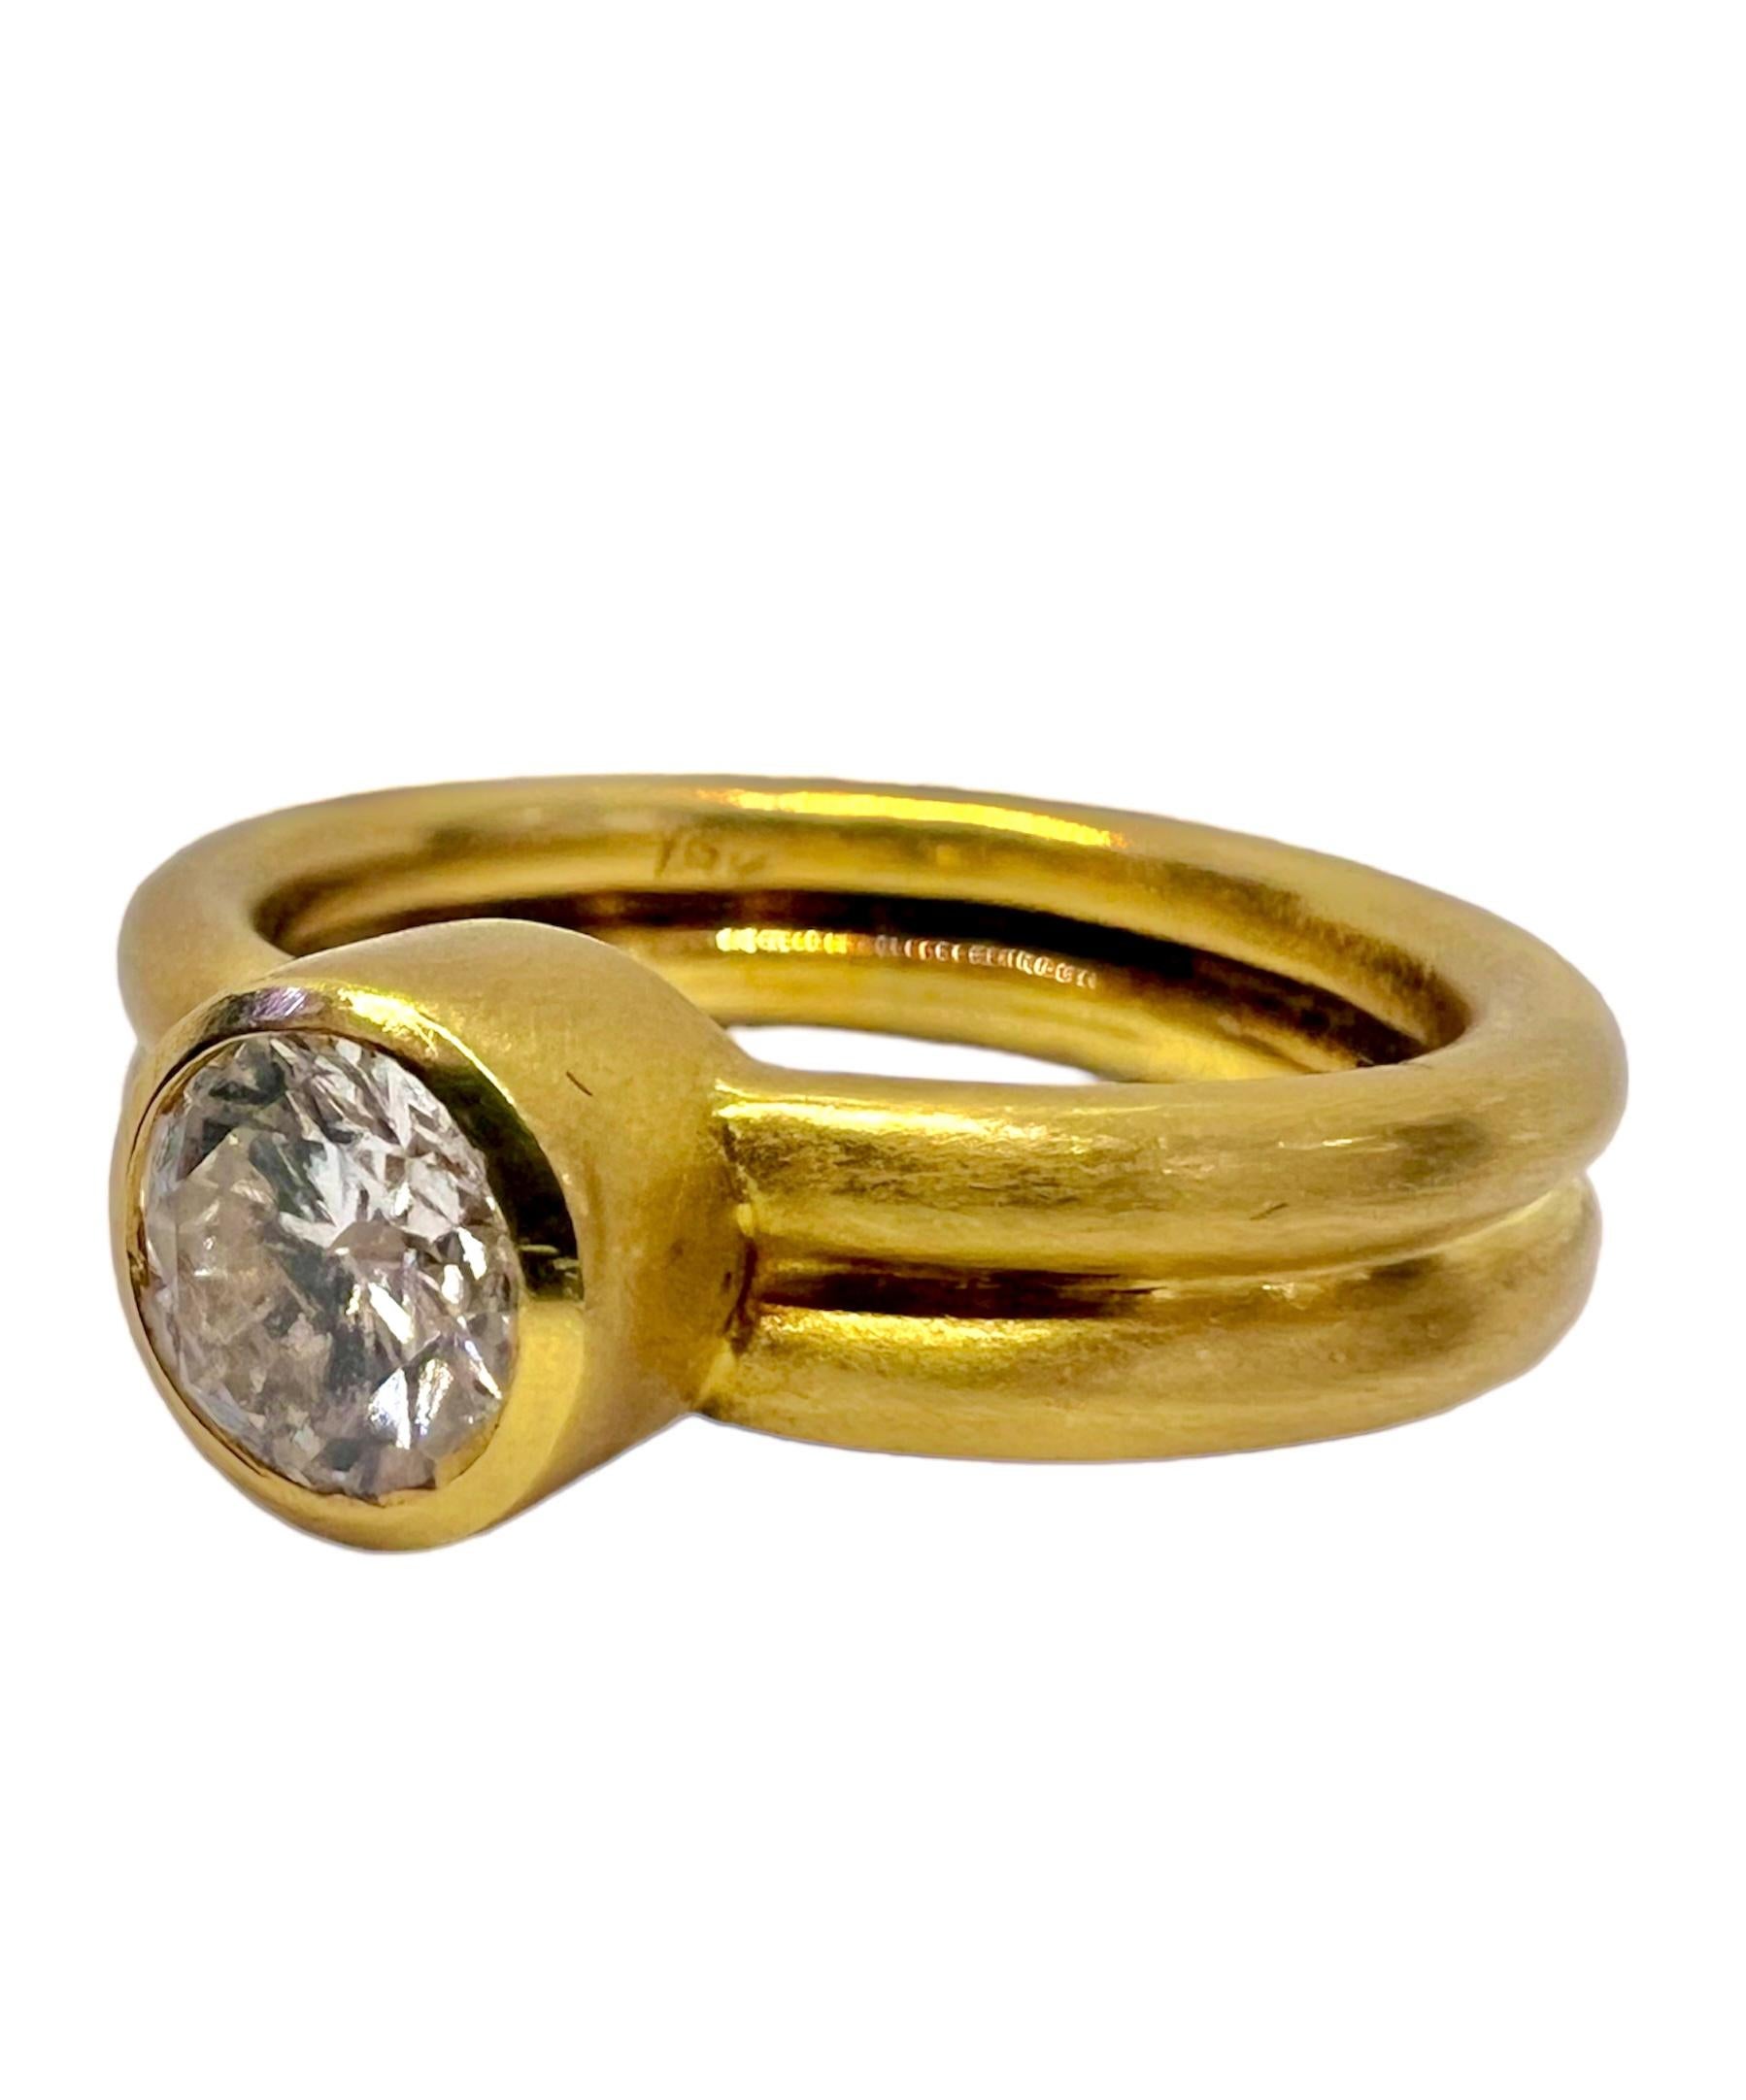 Round cut diamond ring in 18K yellow gold setting.

Sophia D by Joseph Dardashti LTD has been known worldwide for 35 years and are inspired by classic Art Deco design that merges with modern manufacturing techniques. 